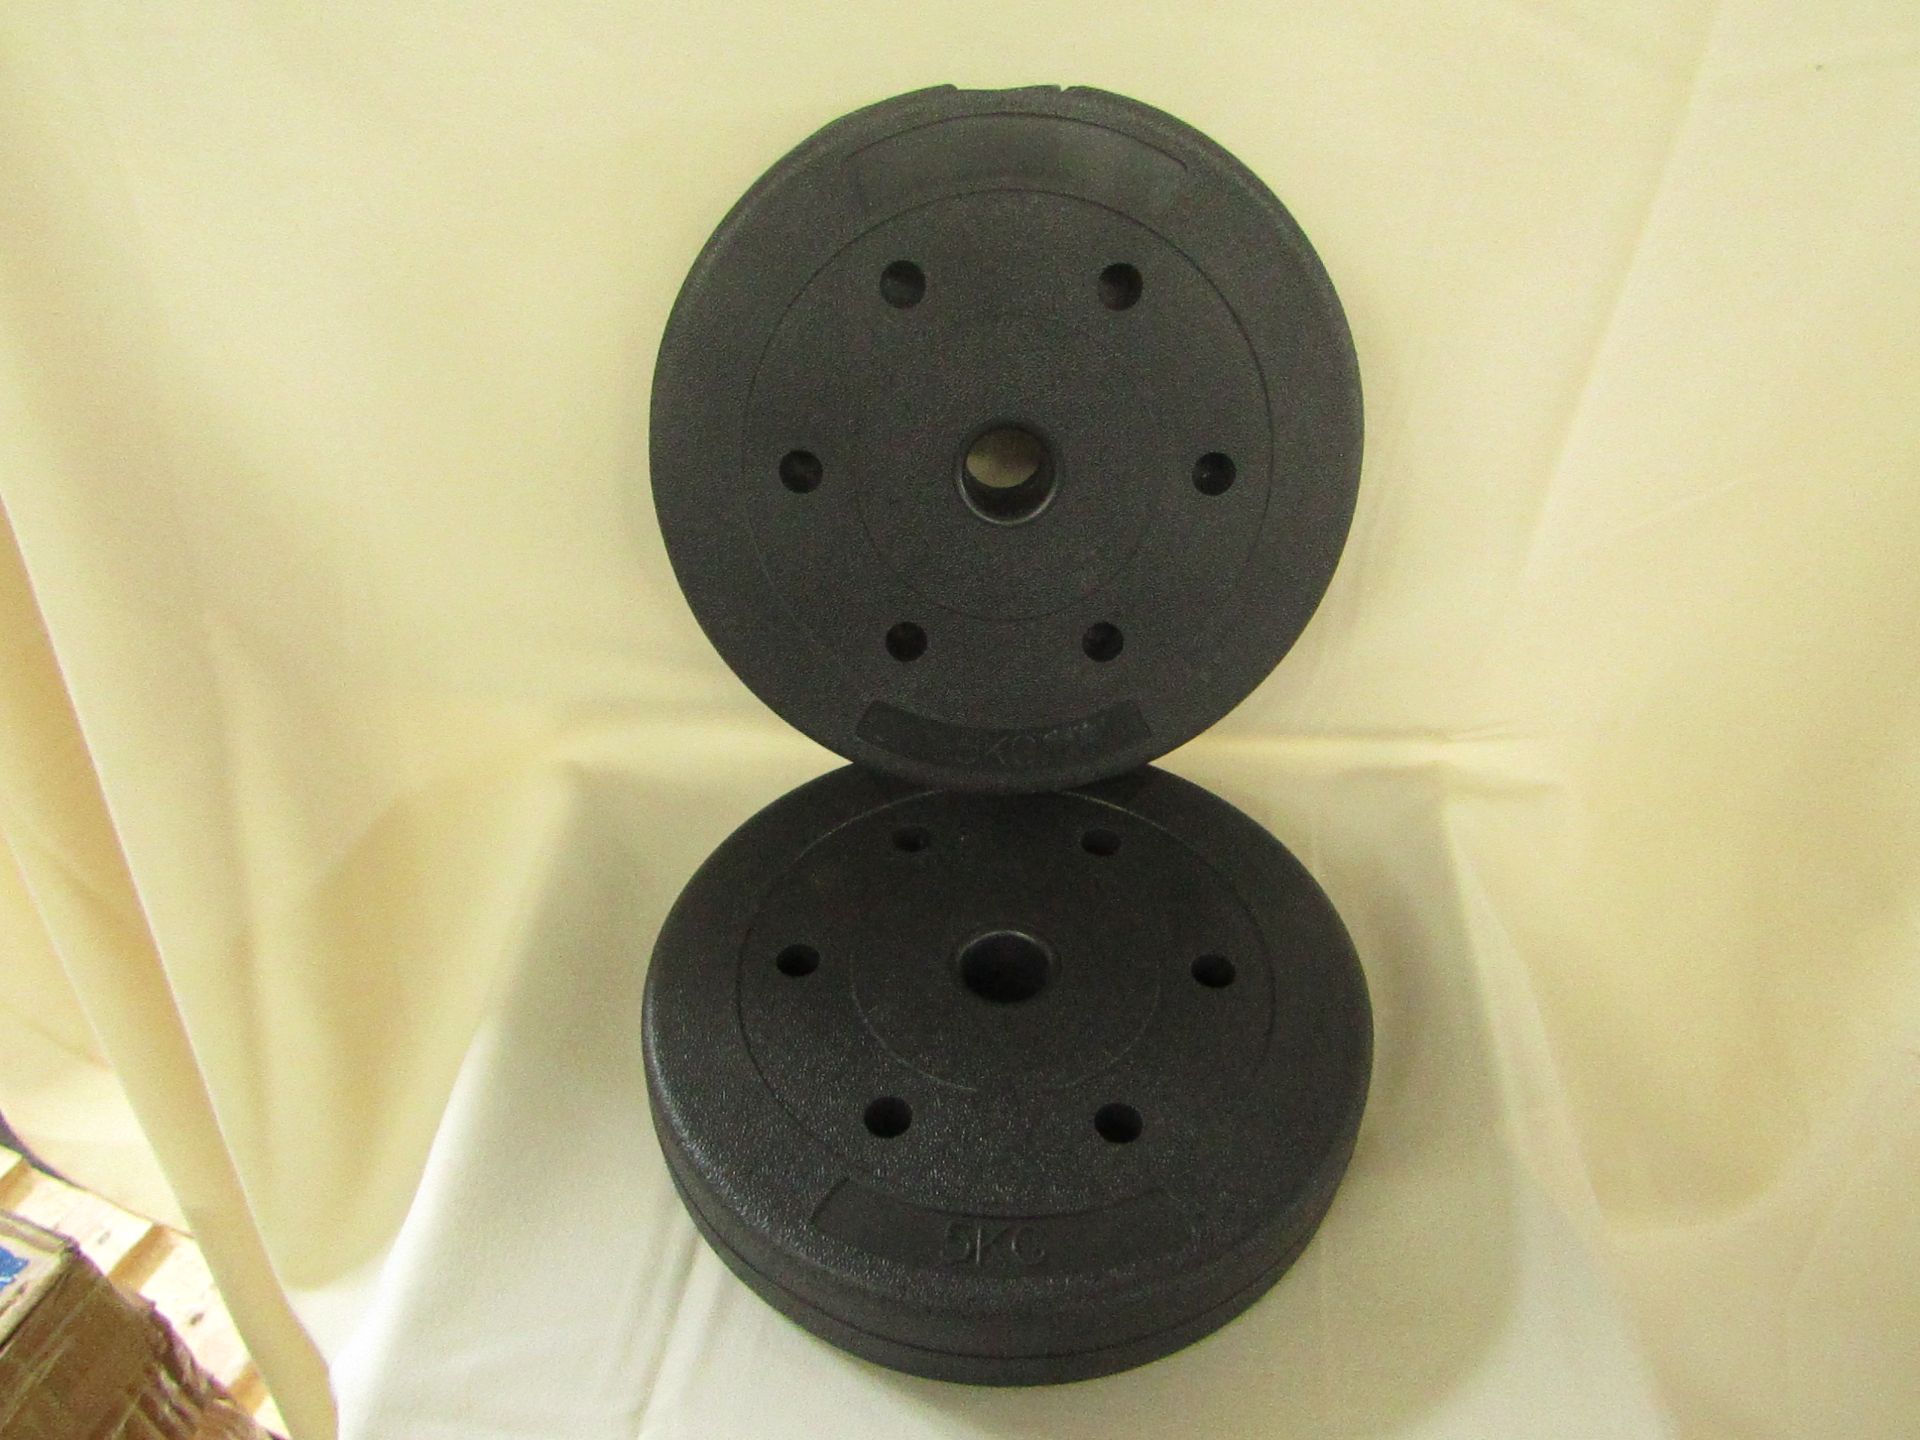 1x Set Of 2 5KG Weights - No Handles Or Accessories Present - New & Boxed.